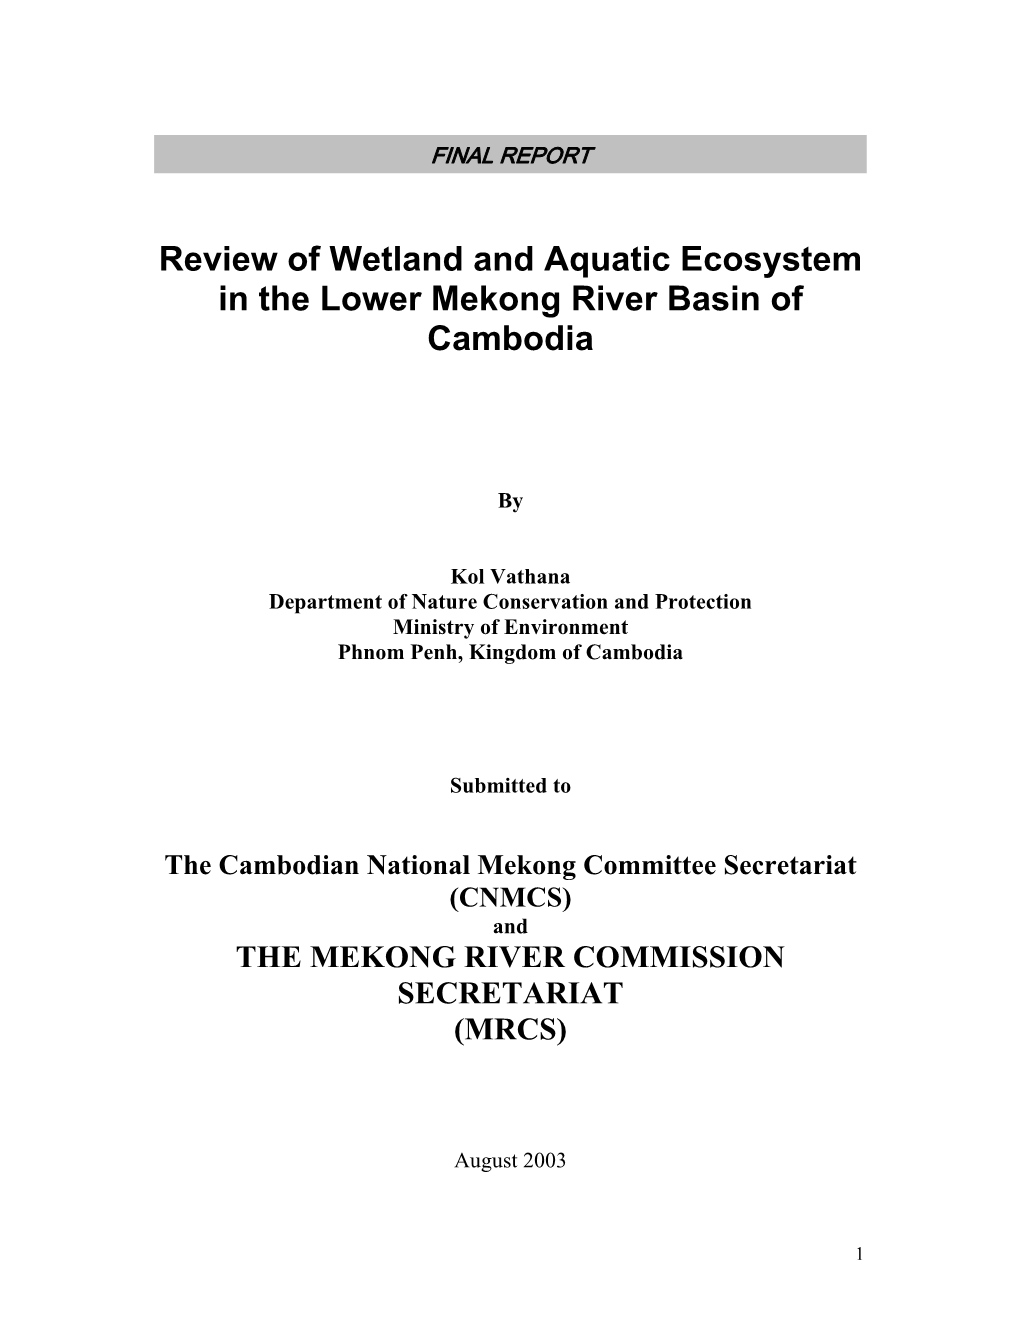 Review of Wetland and Aquatic Ecosystem in the Lower Mekong River Basin of Cambodia